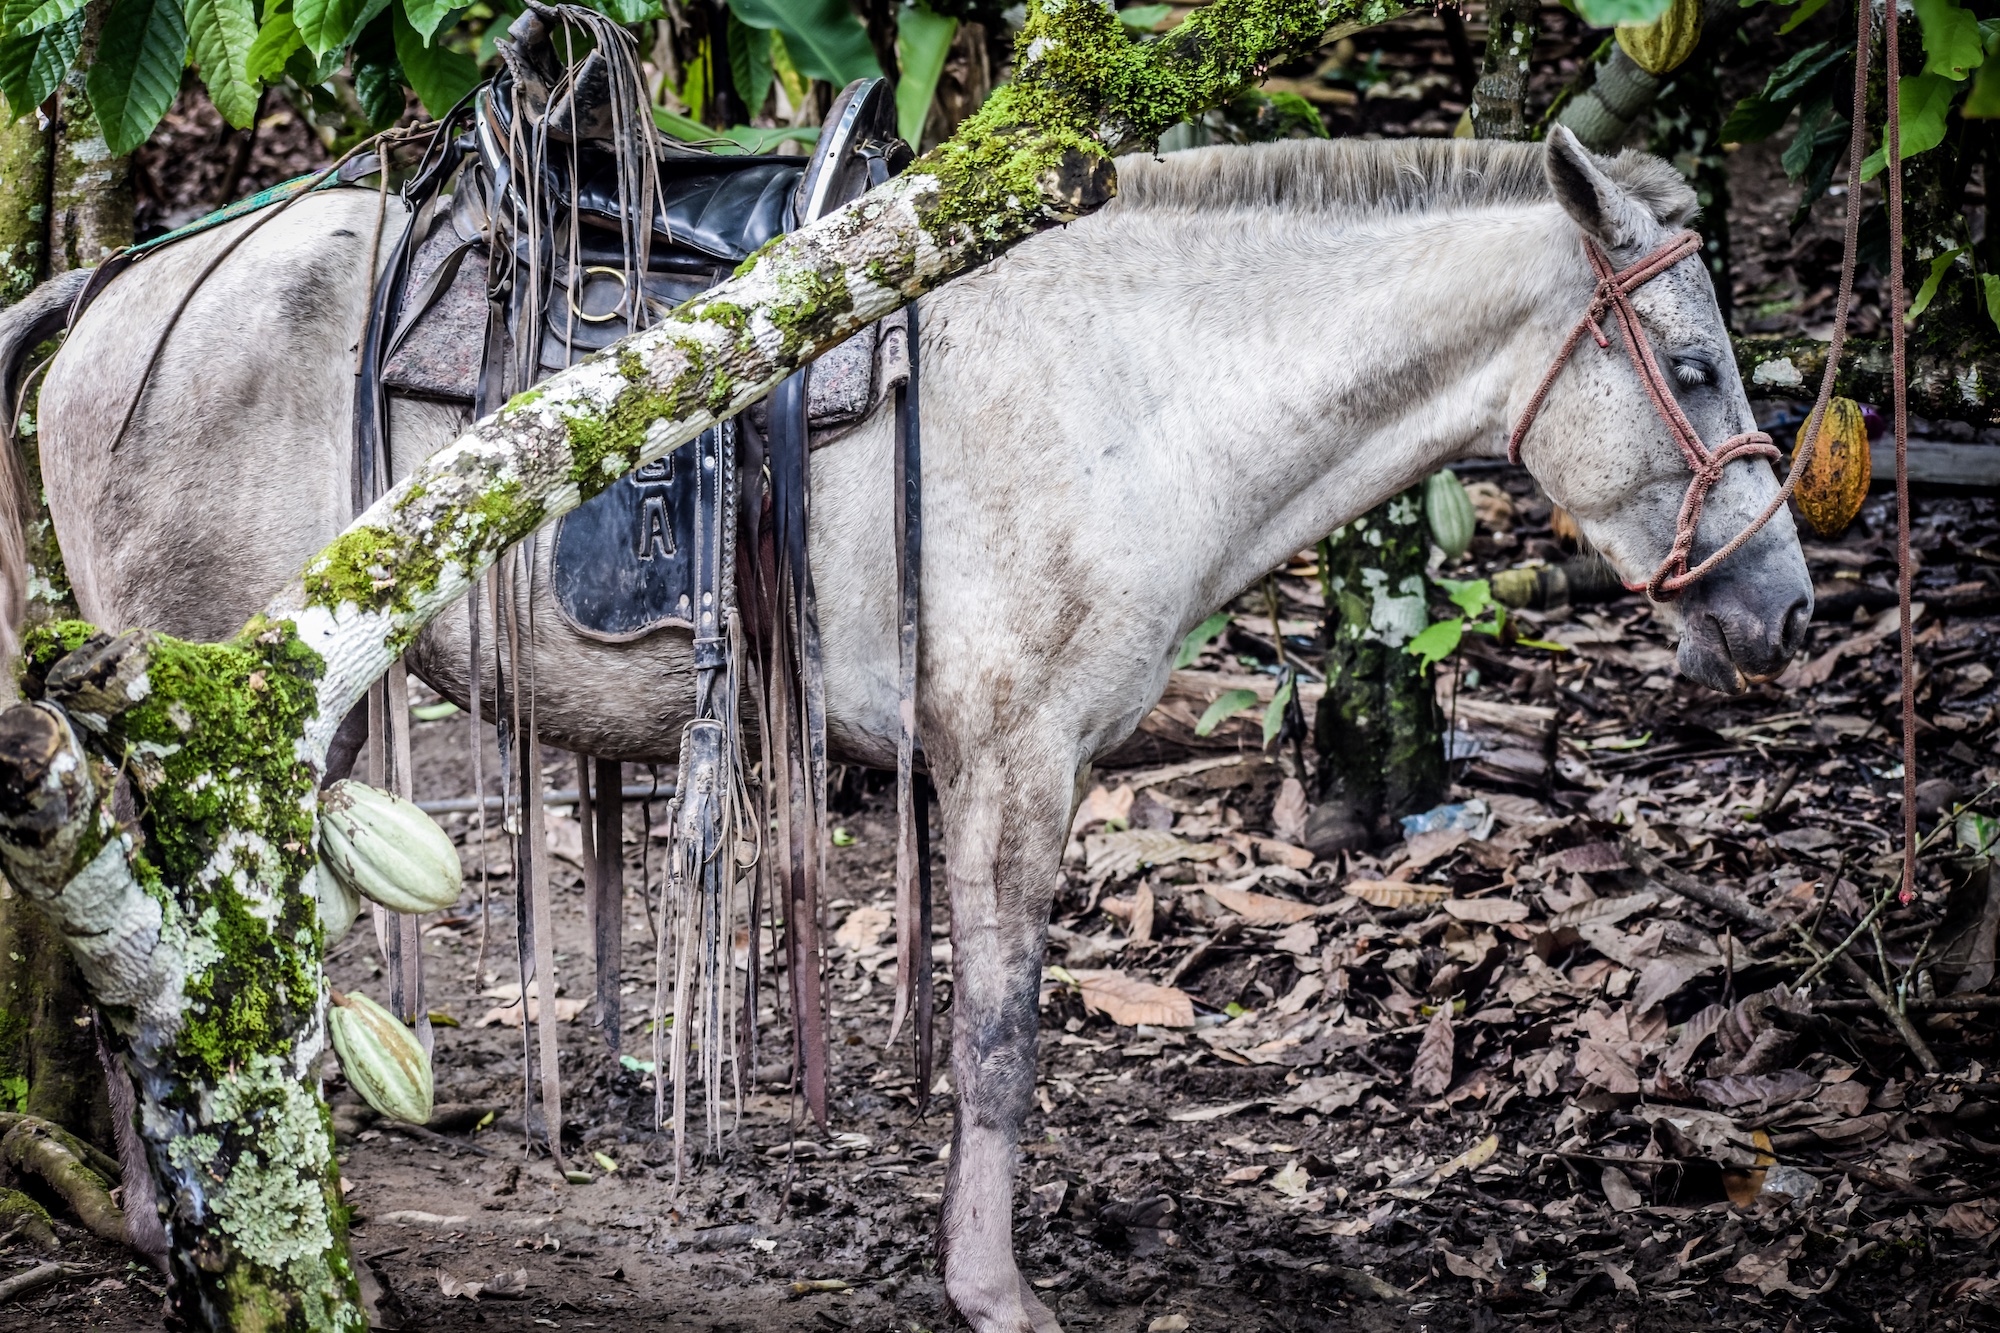 One Welfare | Case Study 2
Equine welfare in the production
of organic cocoa in Nigeria